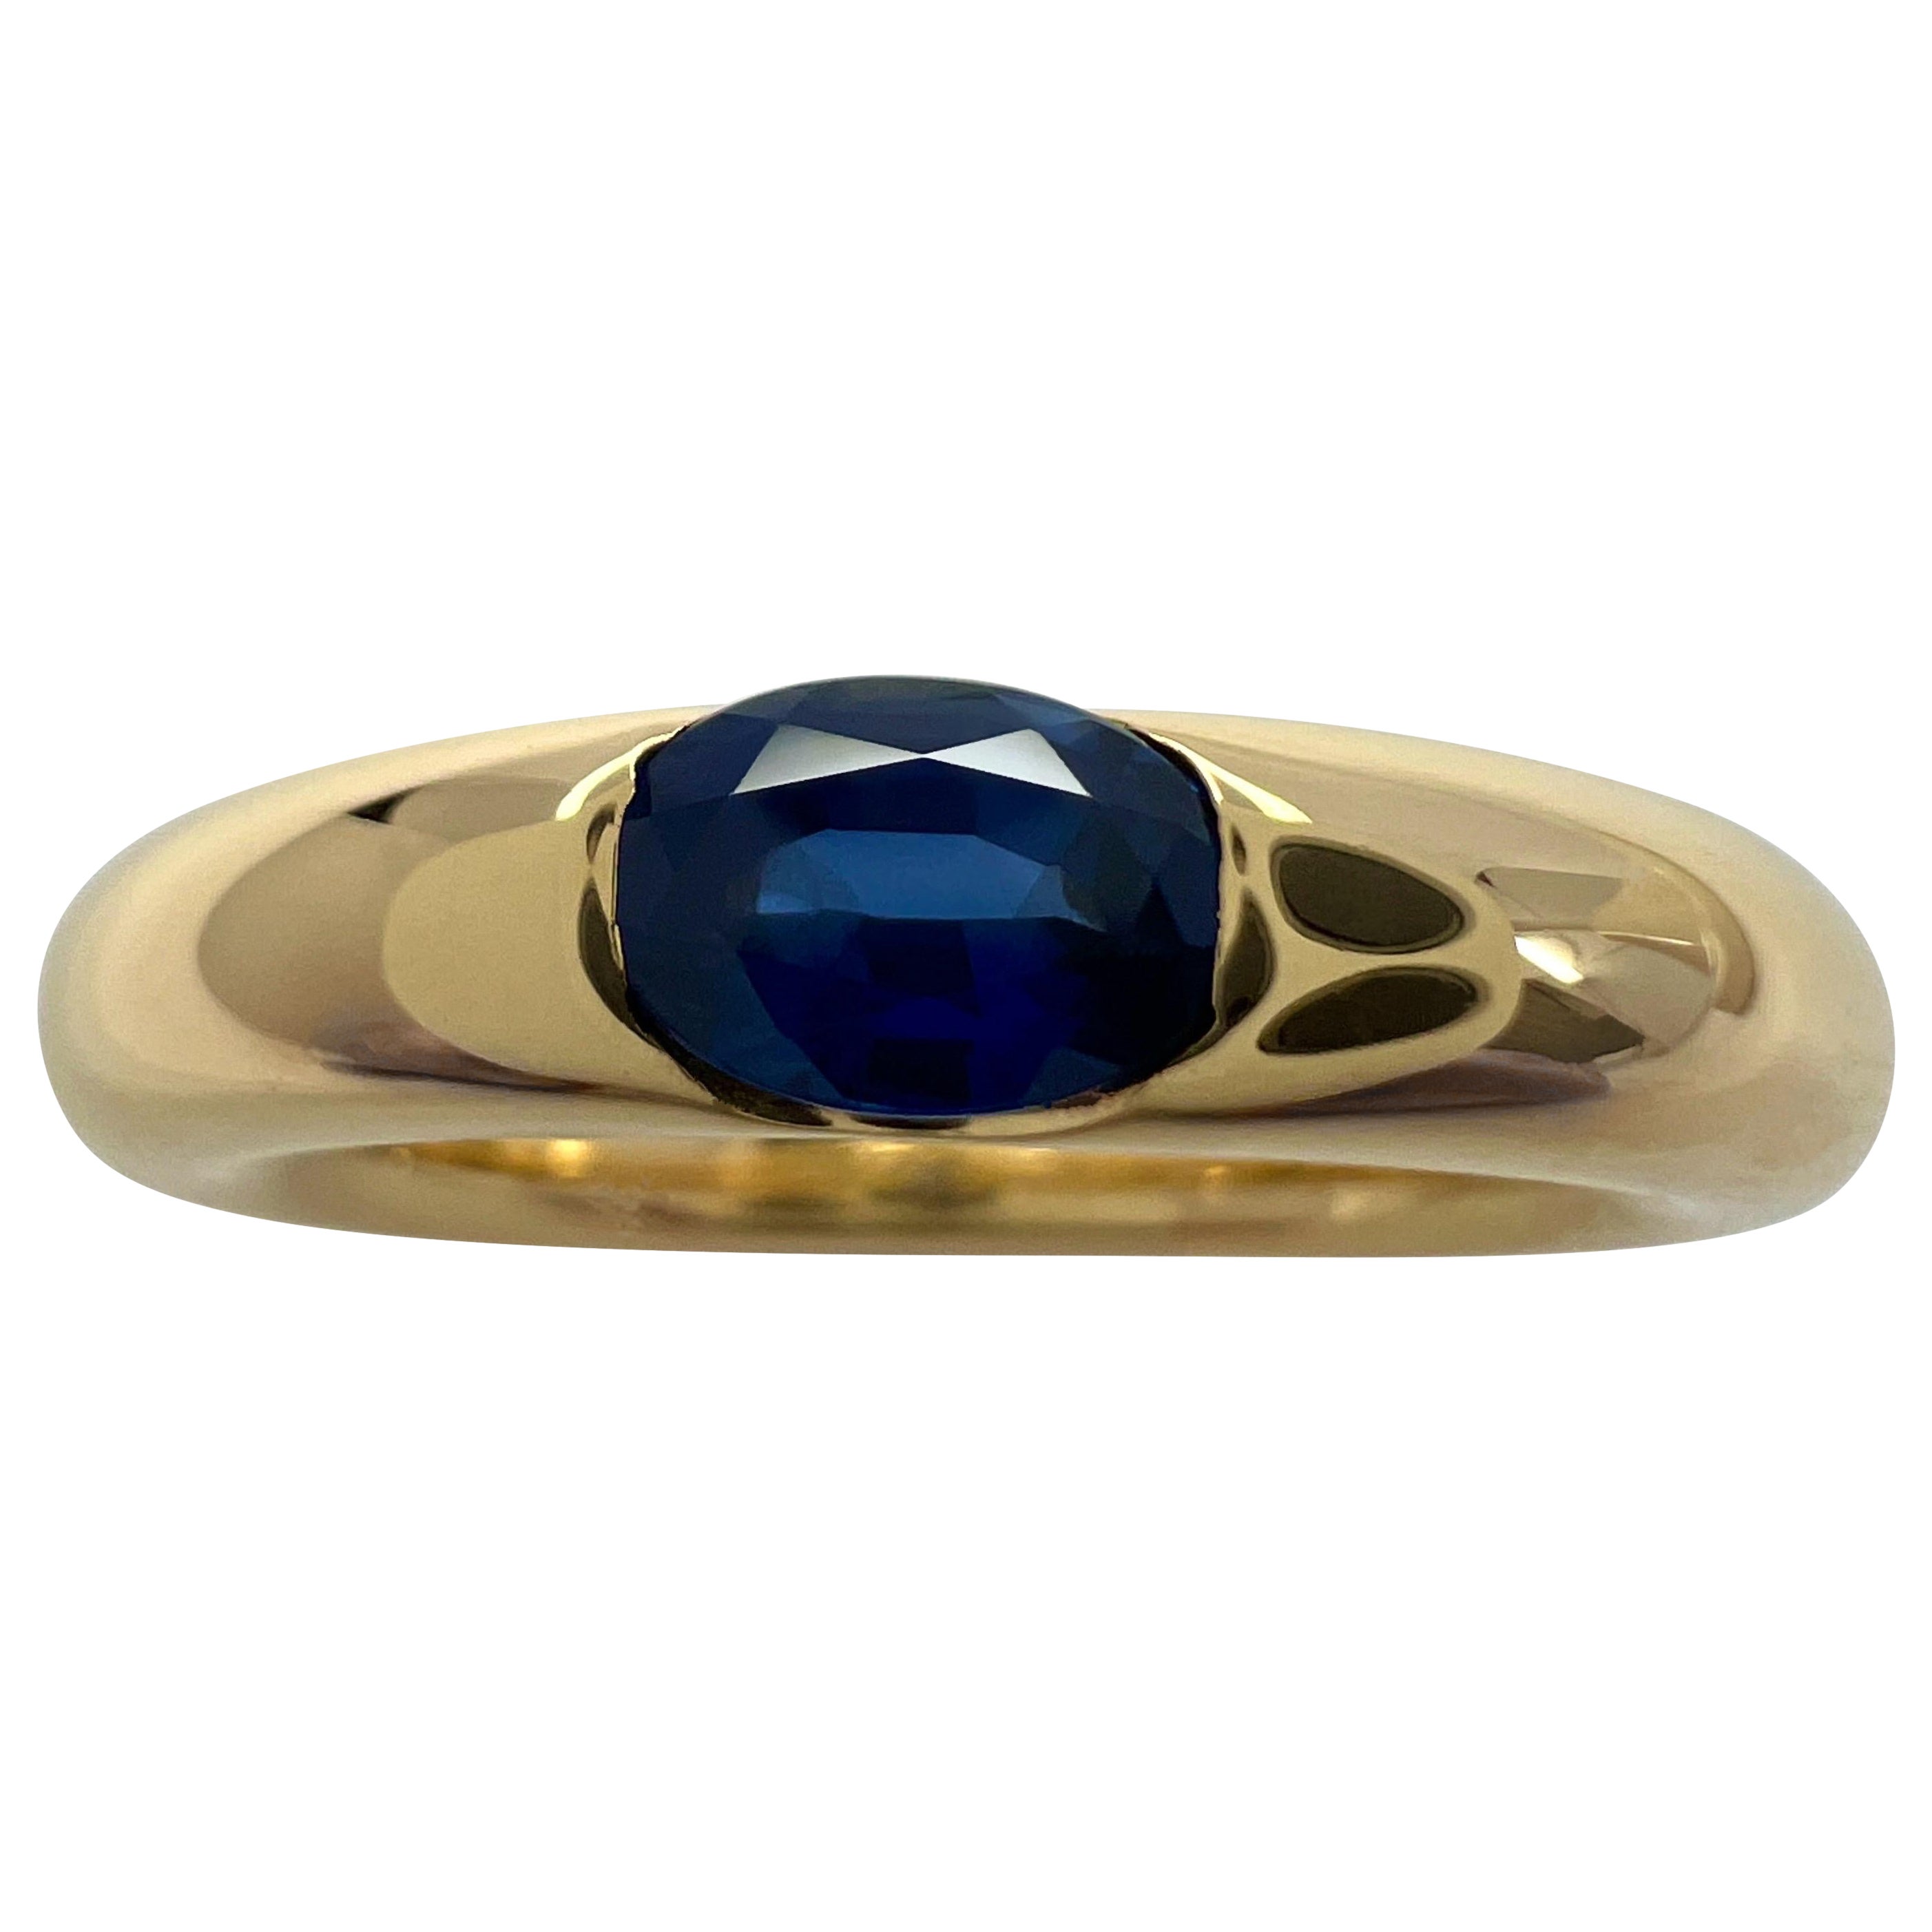 Vintage Cartier Blue Sapphire Oval Ellipse 18k Yellow Gold Solitaire Ring 50